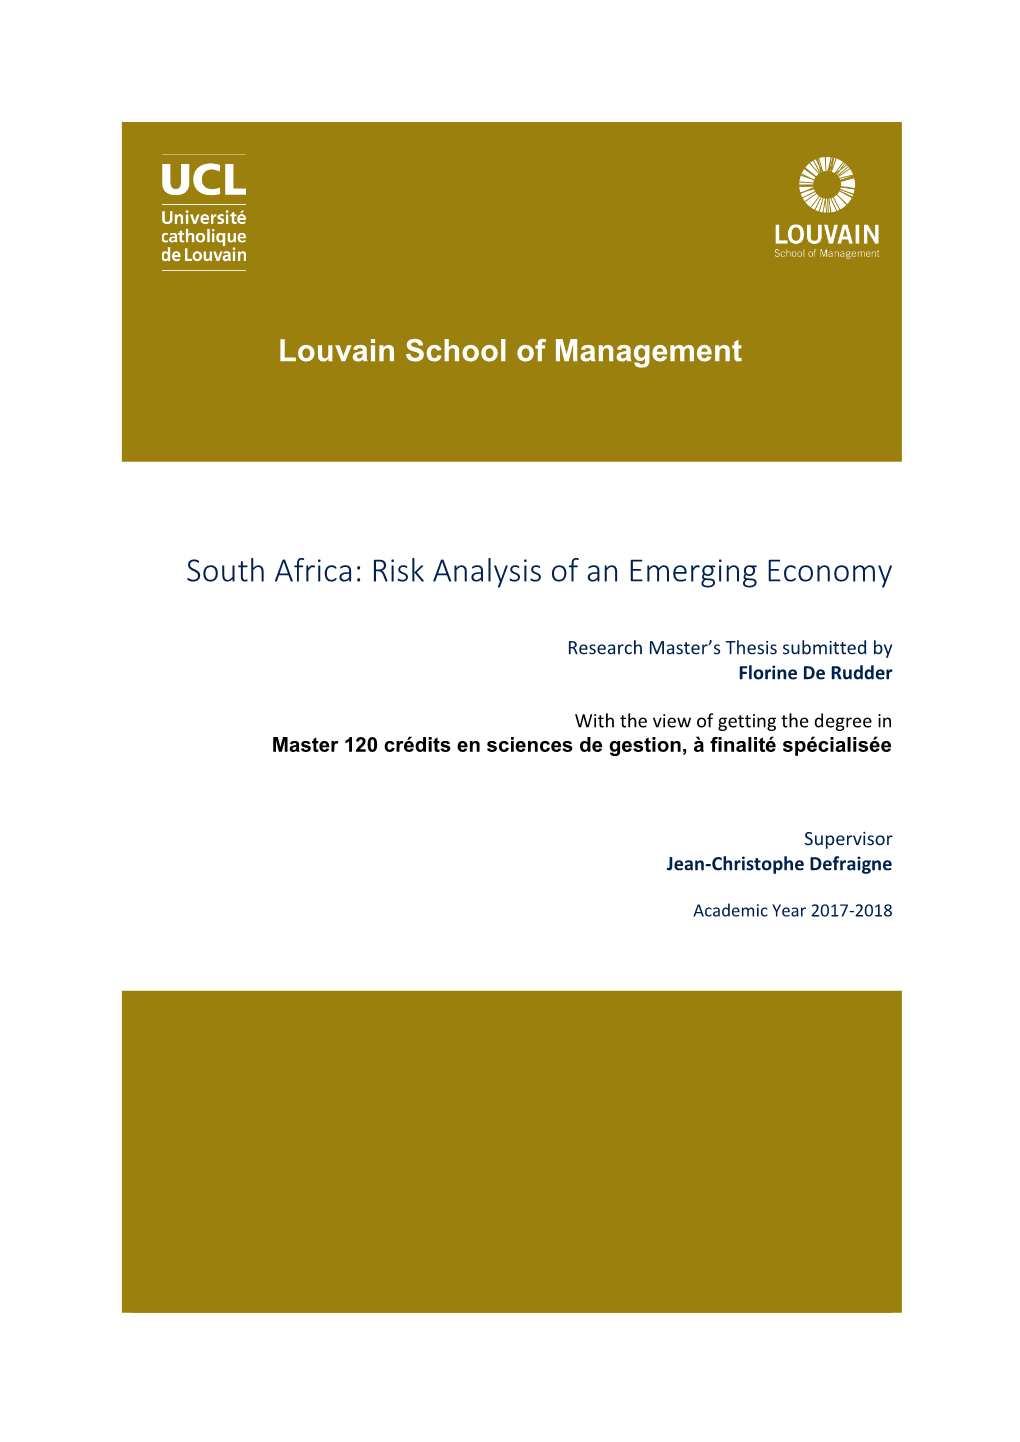 Risk Analysis of an Emerging Economy